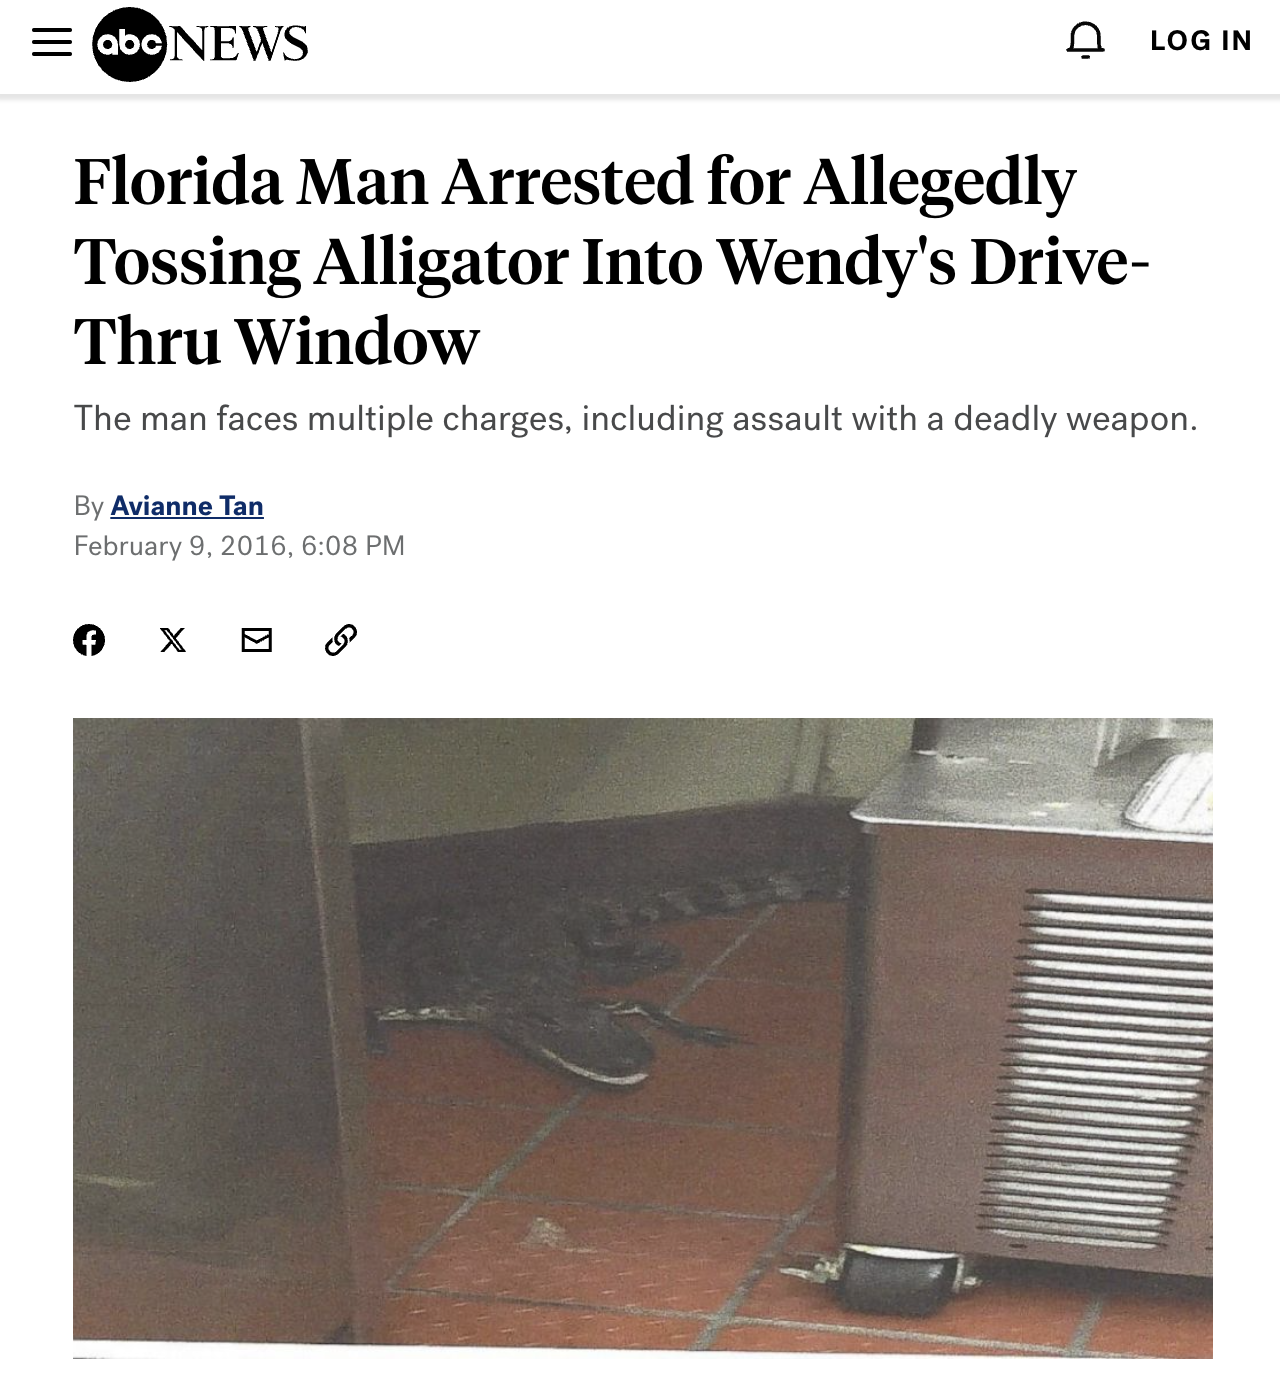 screenshot - abc News Florida Man Arrested for Allegedly Tossing Alligator Into Wendy's Drive Thru Window Log In The man faces multiple charges, including assault with a deadly weapon. By Avianne Tan ,